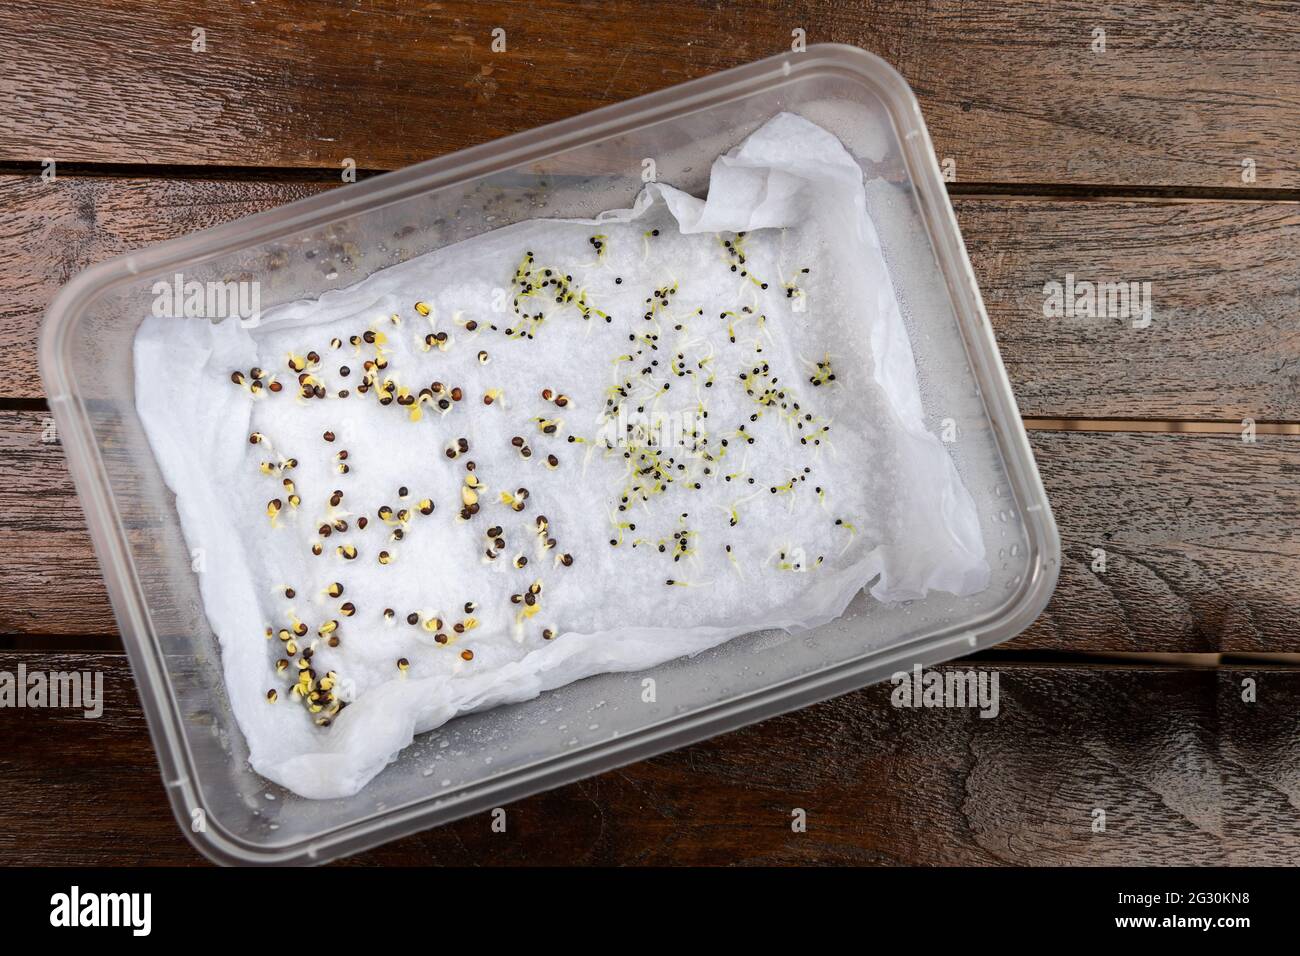 Seeds are placed in moist water soaked kitchen towel to germinate in container Stock Photo